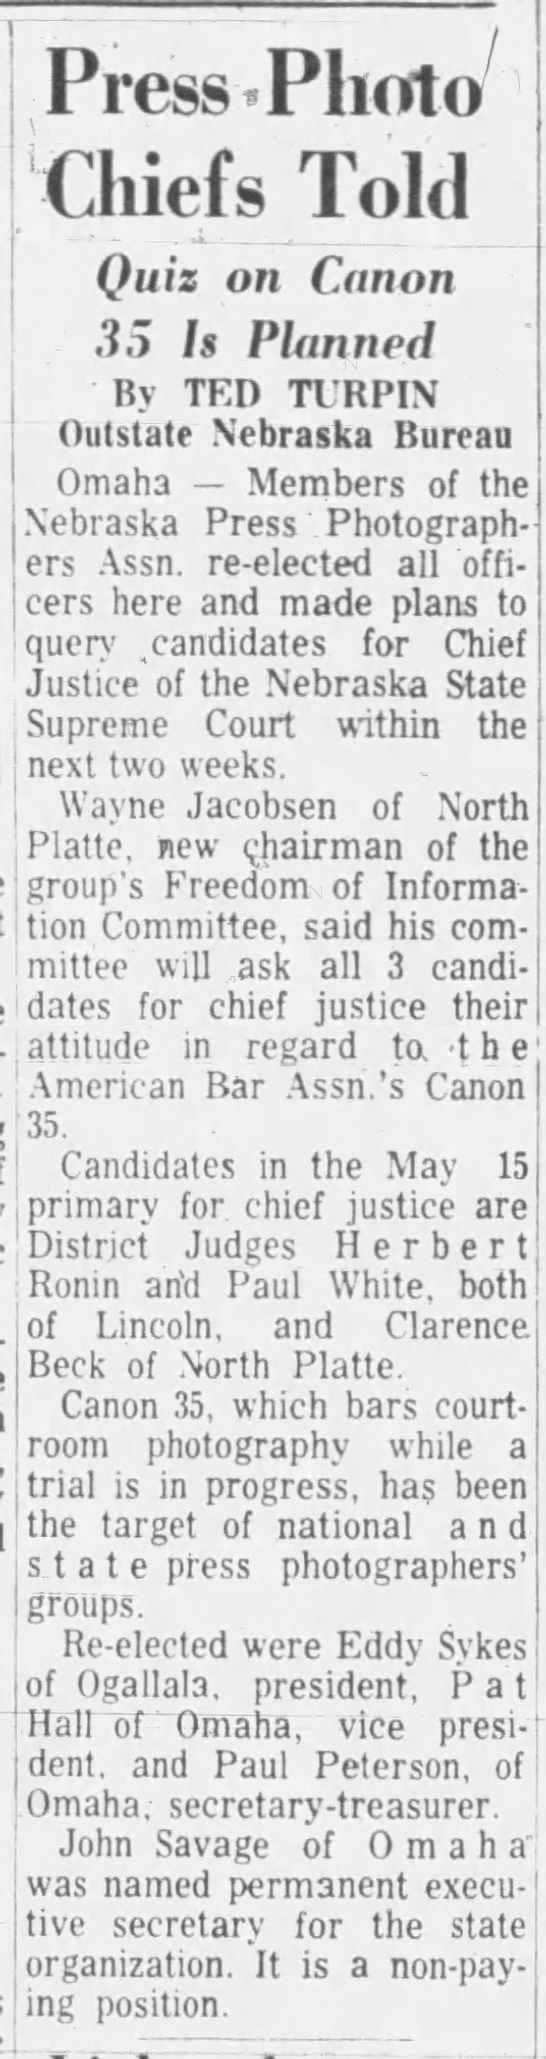 Turpin, Ted. Press Photo Chiefs Told, Lincoln Journal Star (Lincoln, Nebraska) 30 Apr 1961, page 22 - 